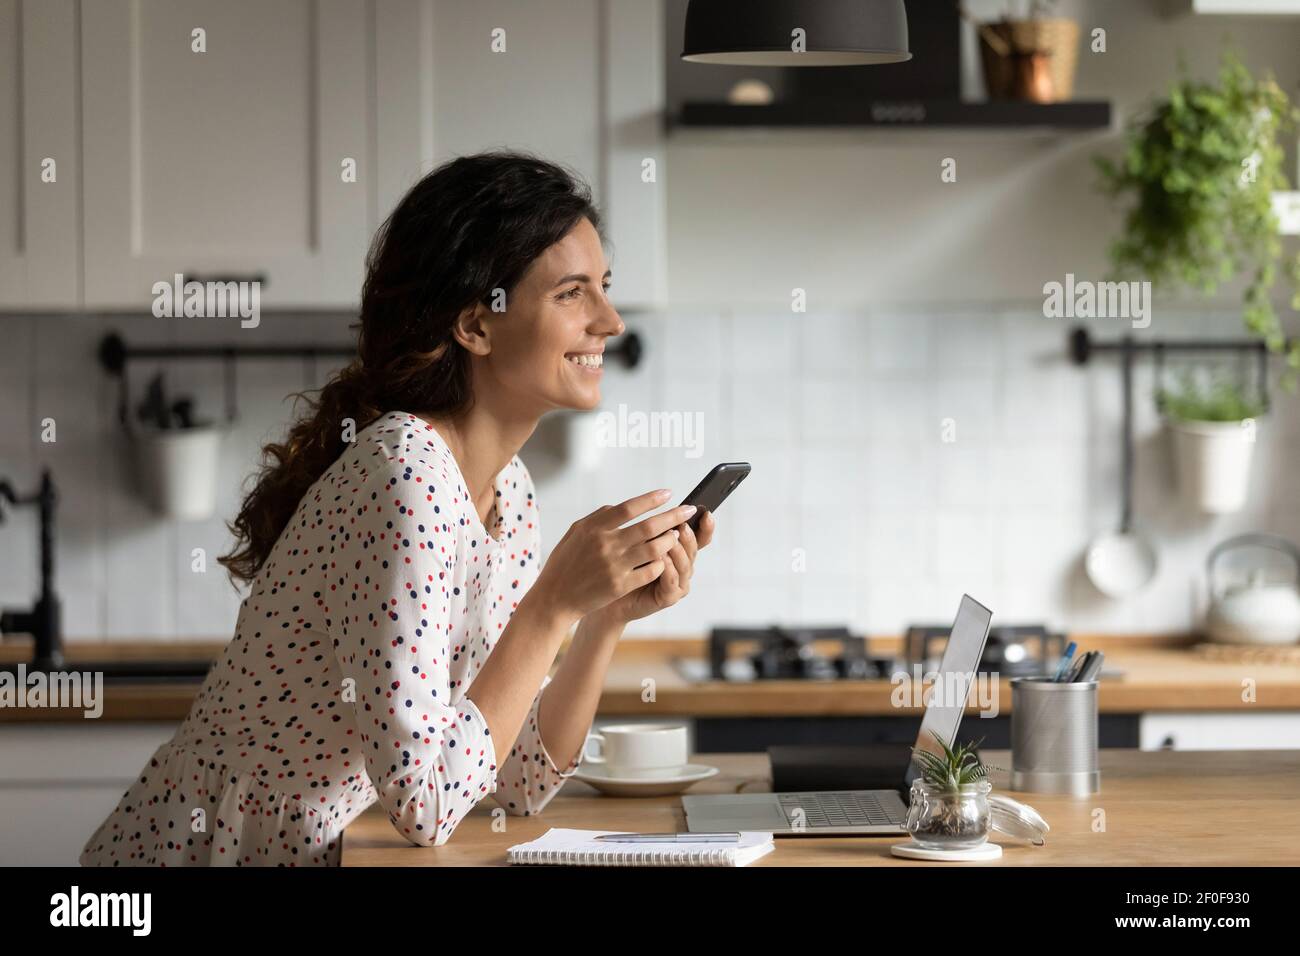 Smiling young female working from home getting good phone message Stock Photo